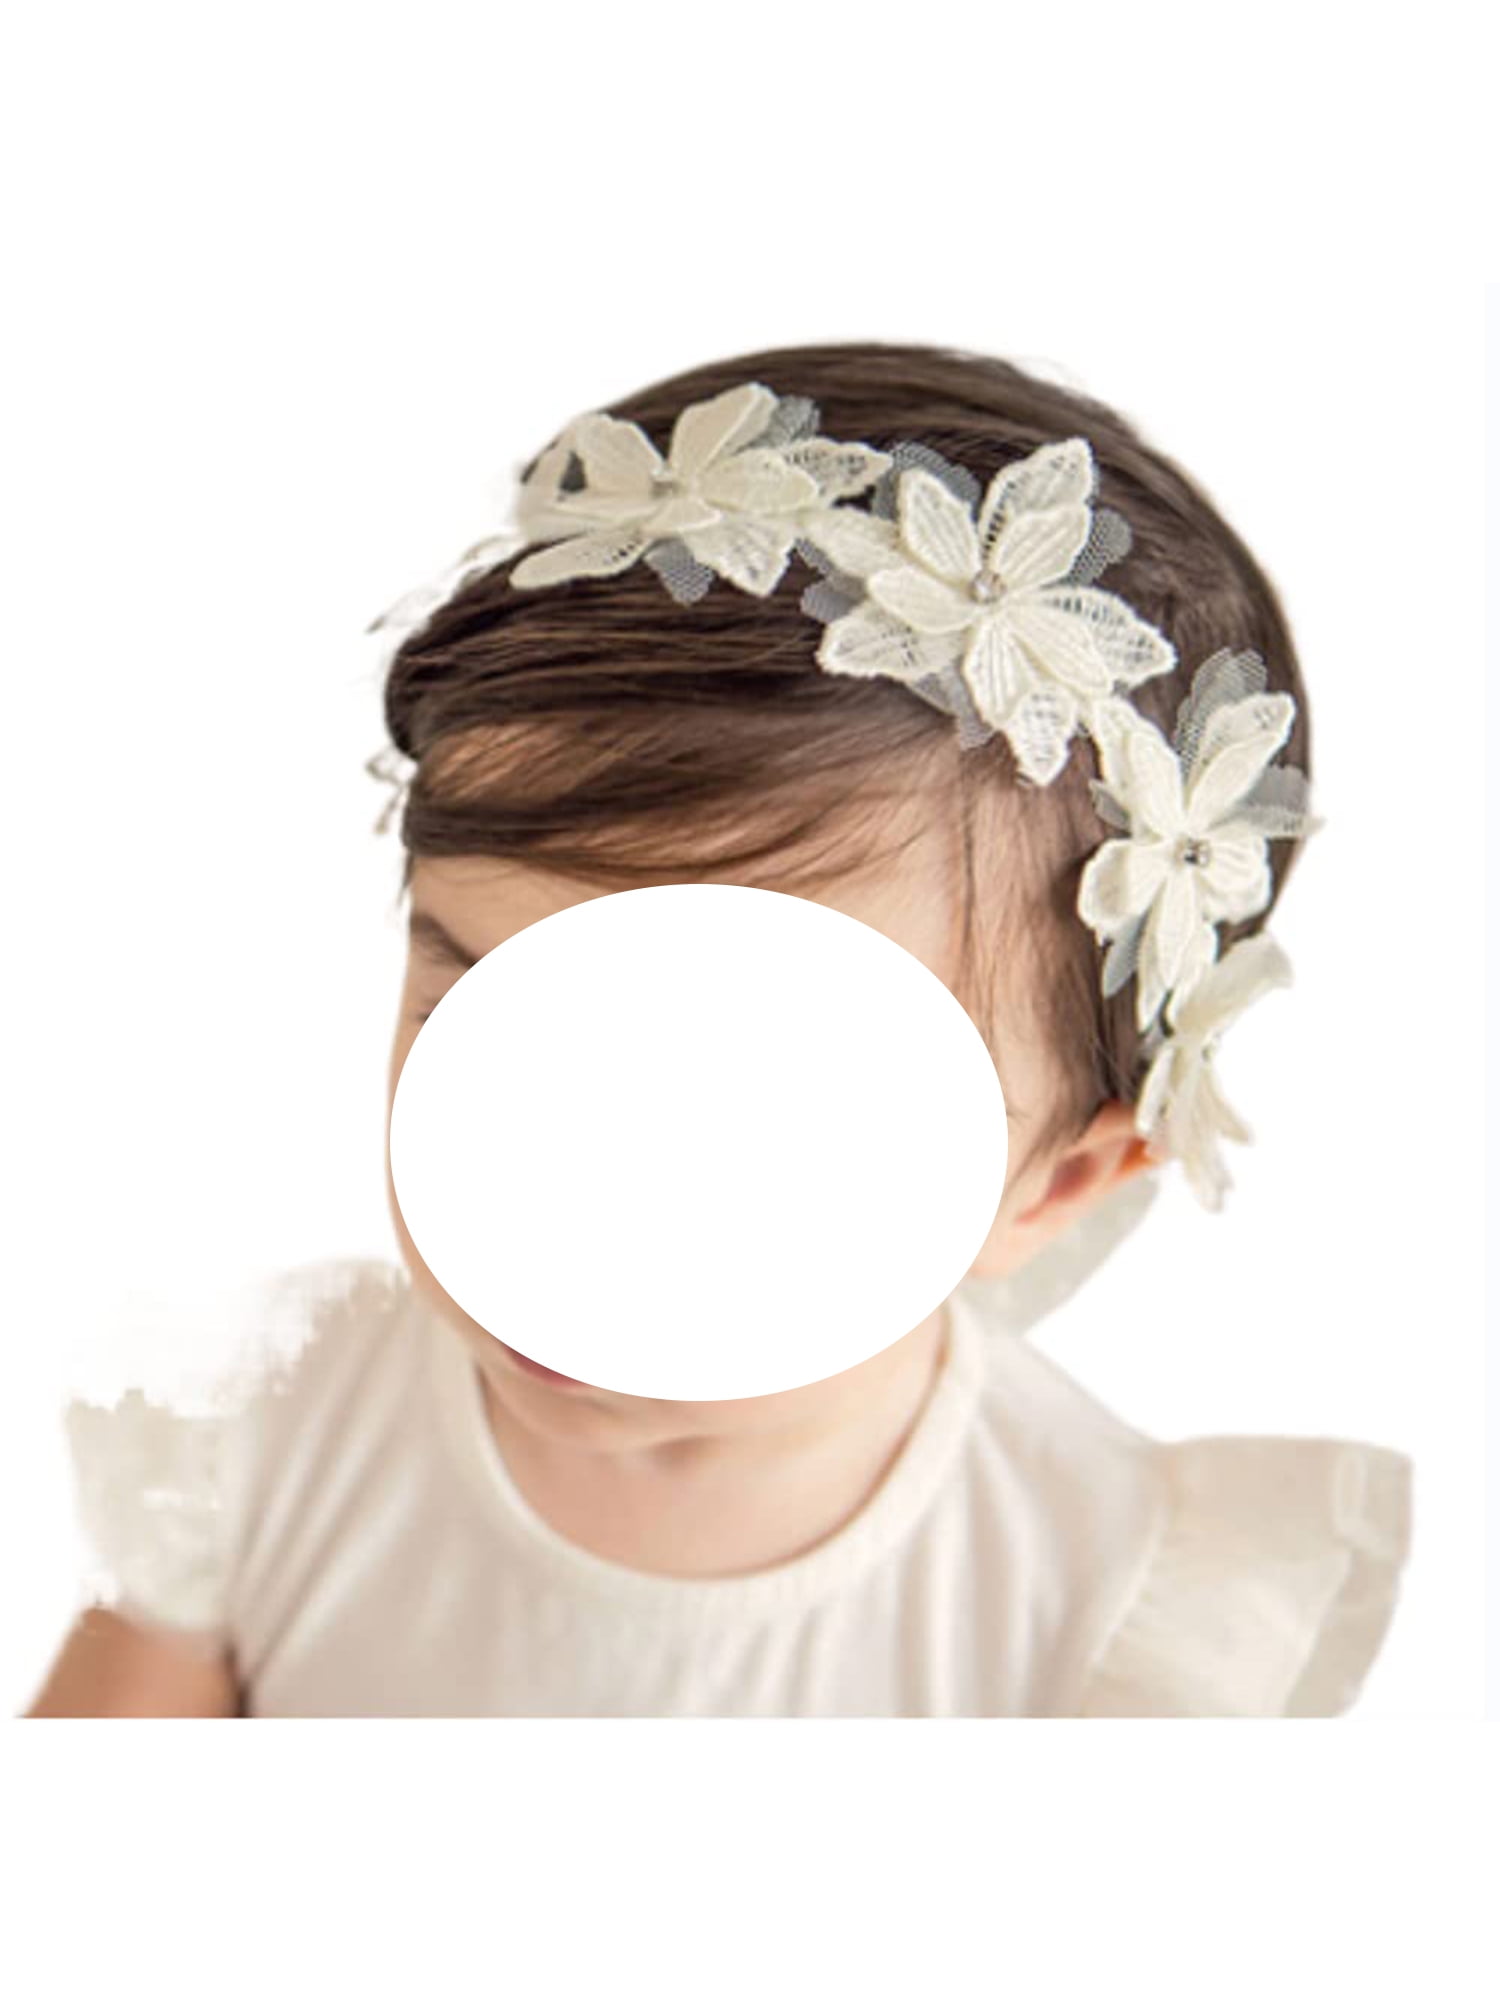 Lovely Baby Girl Toddler Lace Flower Hair Band Headwear Kids Headband Accessory 